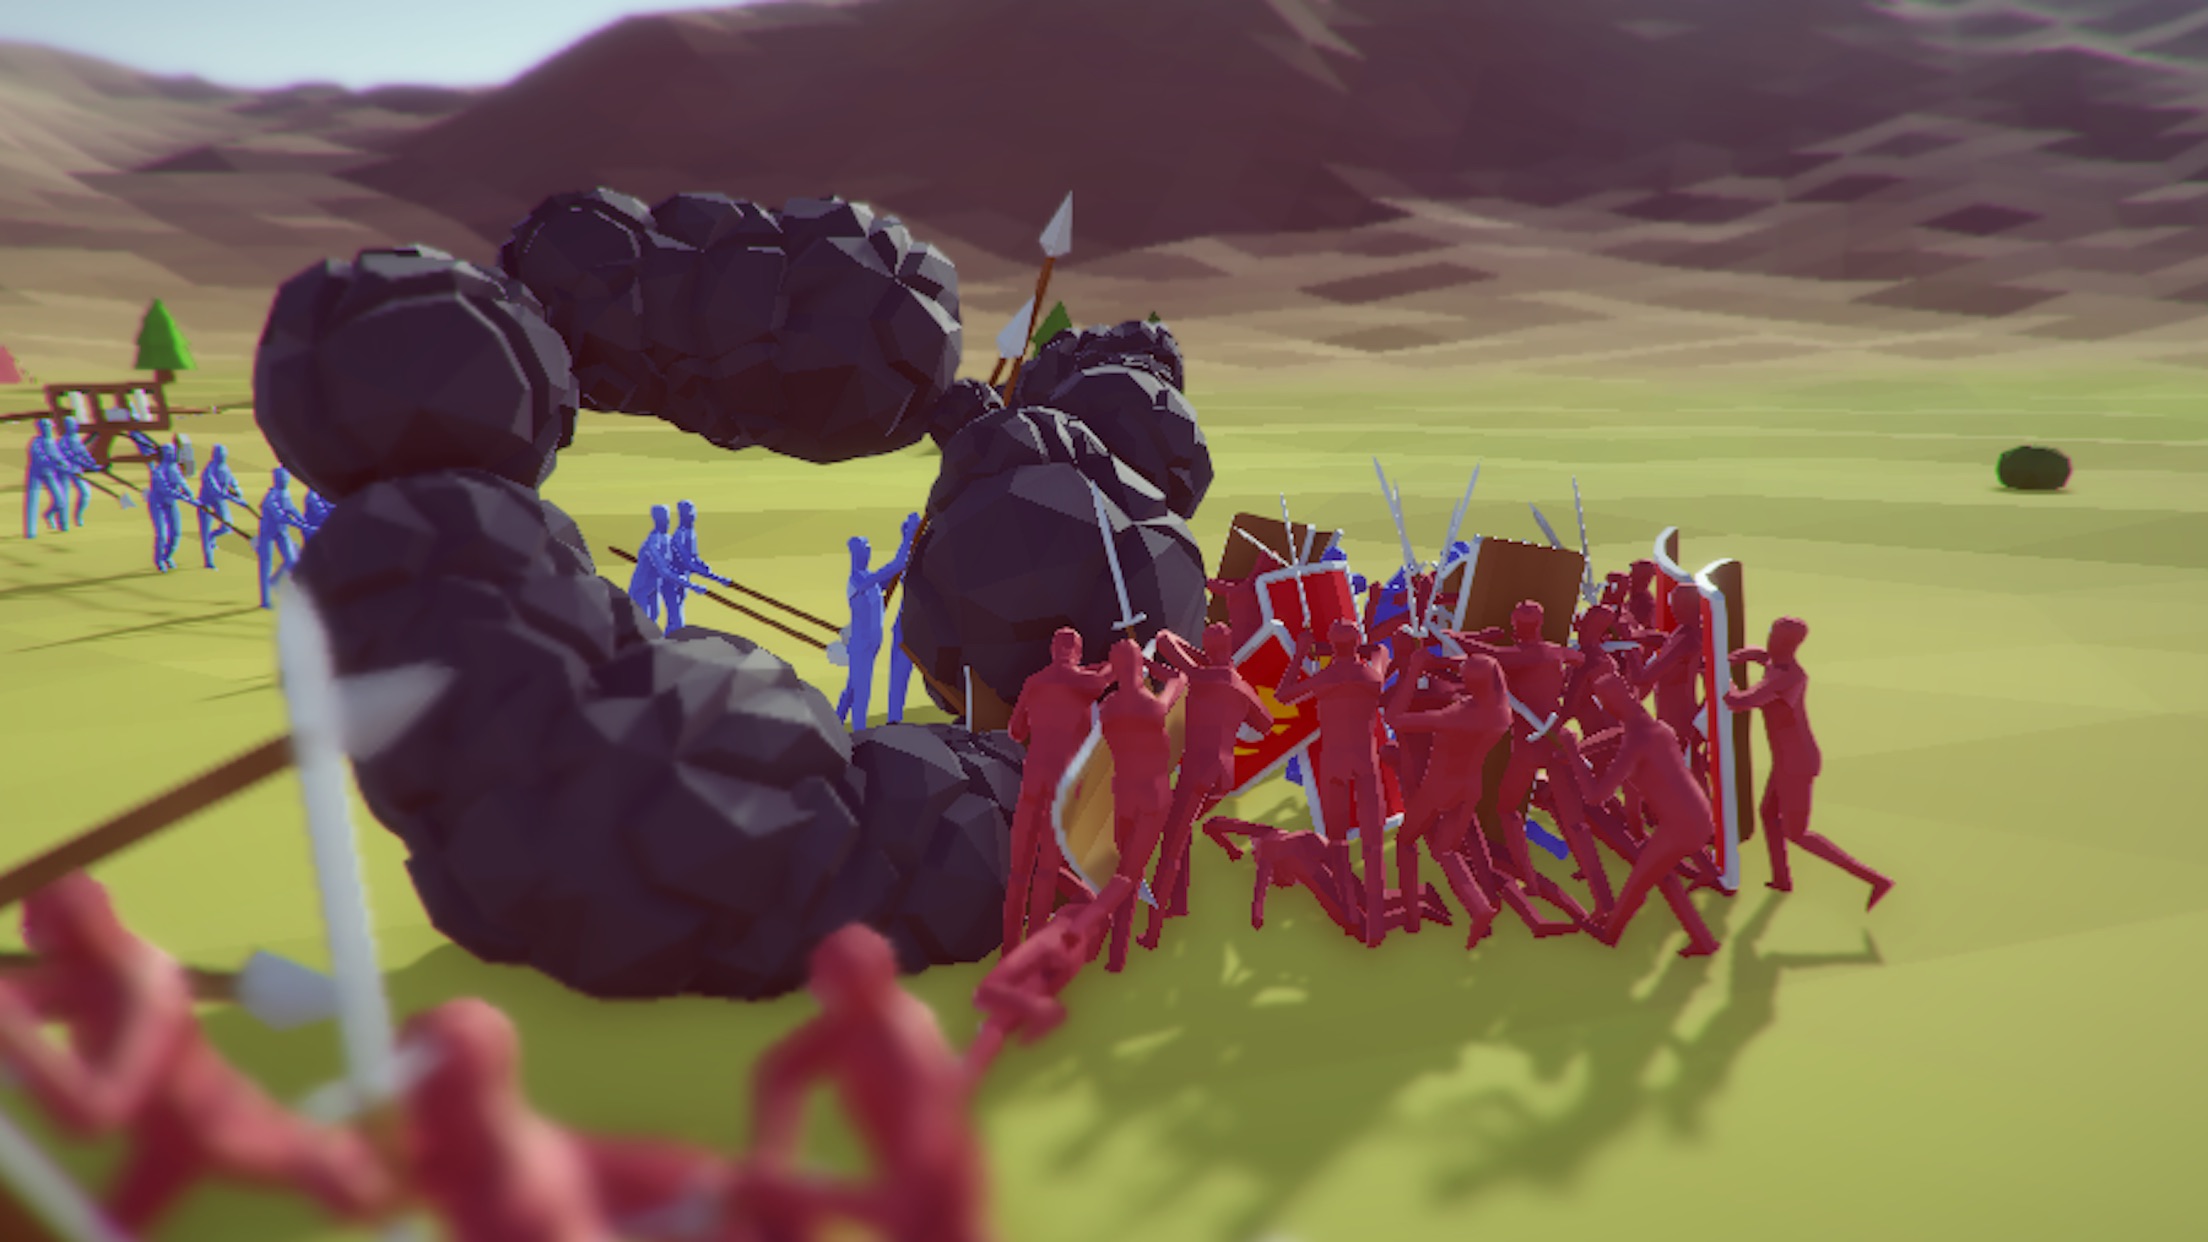 Landfall archives. Табс Альфа версия. Totally accurate Battlegrounds. Landfall игра. Totally accurate Battle Simulator.